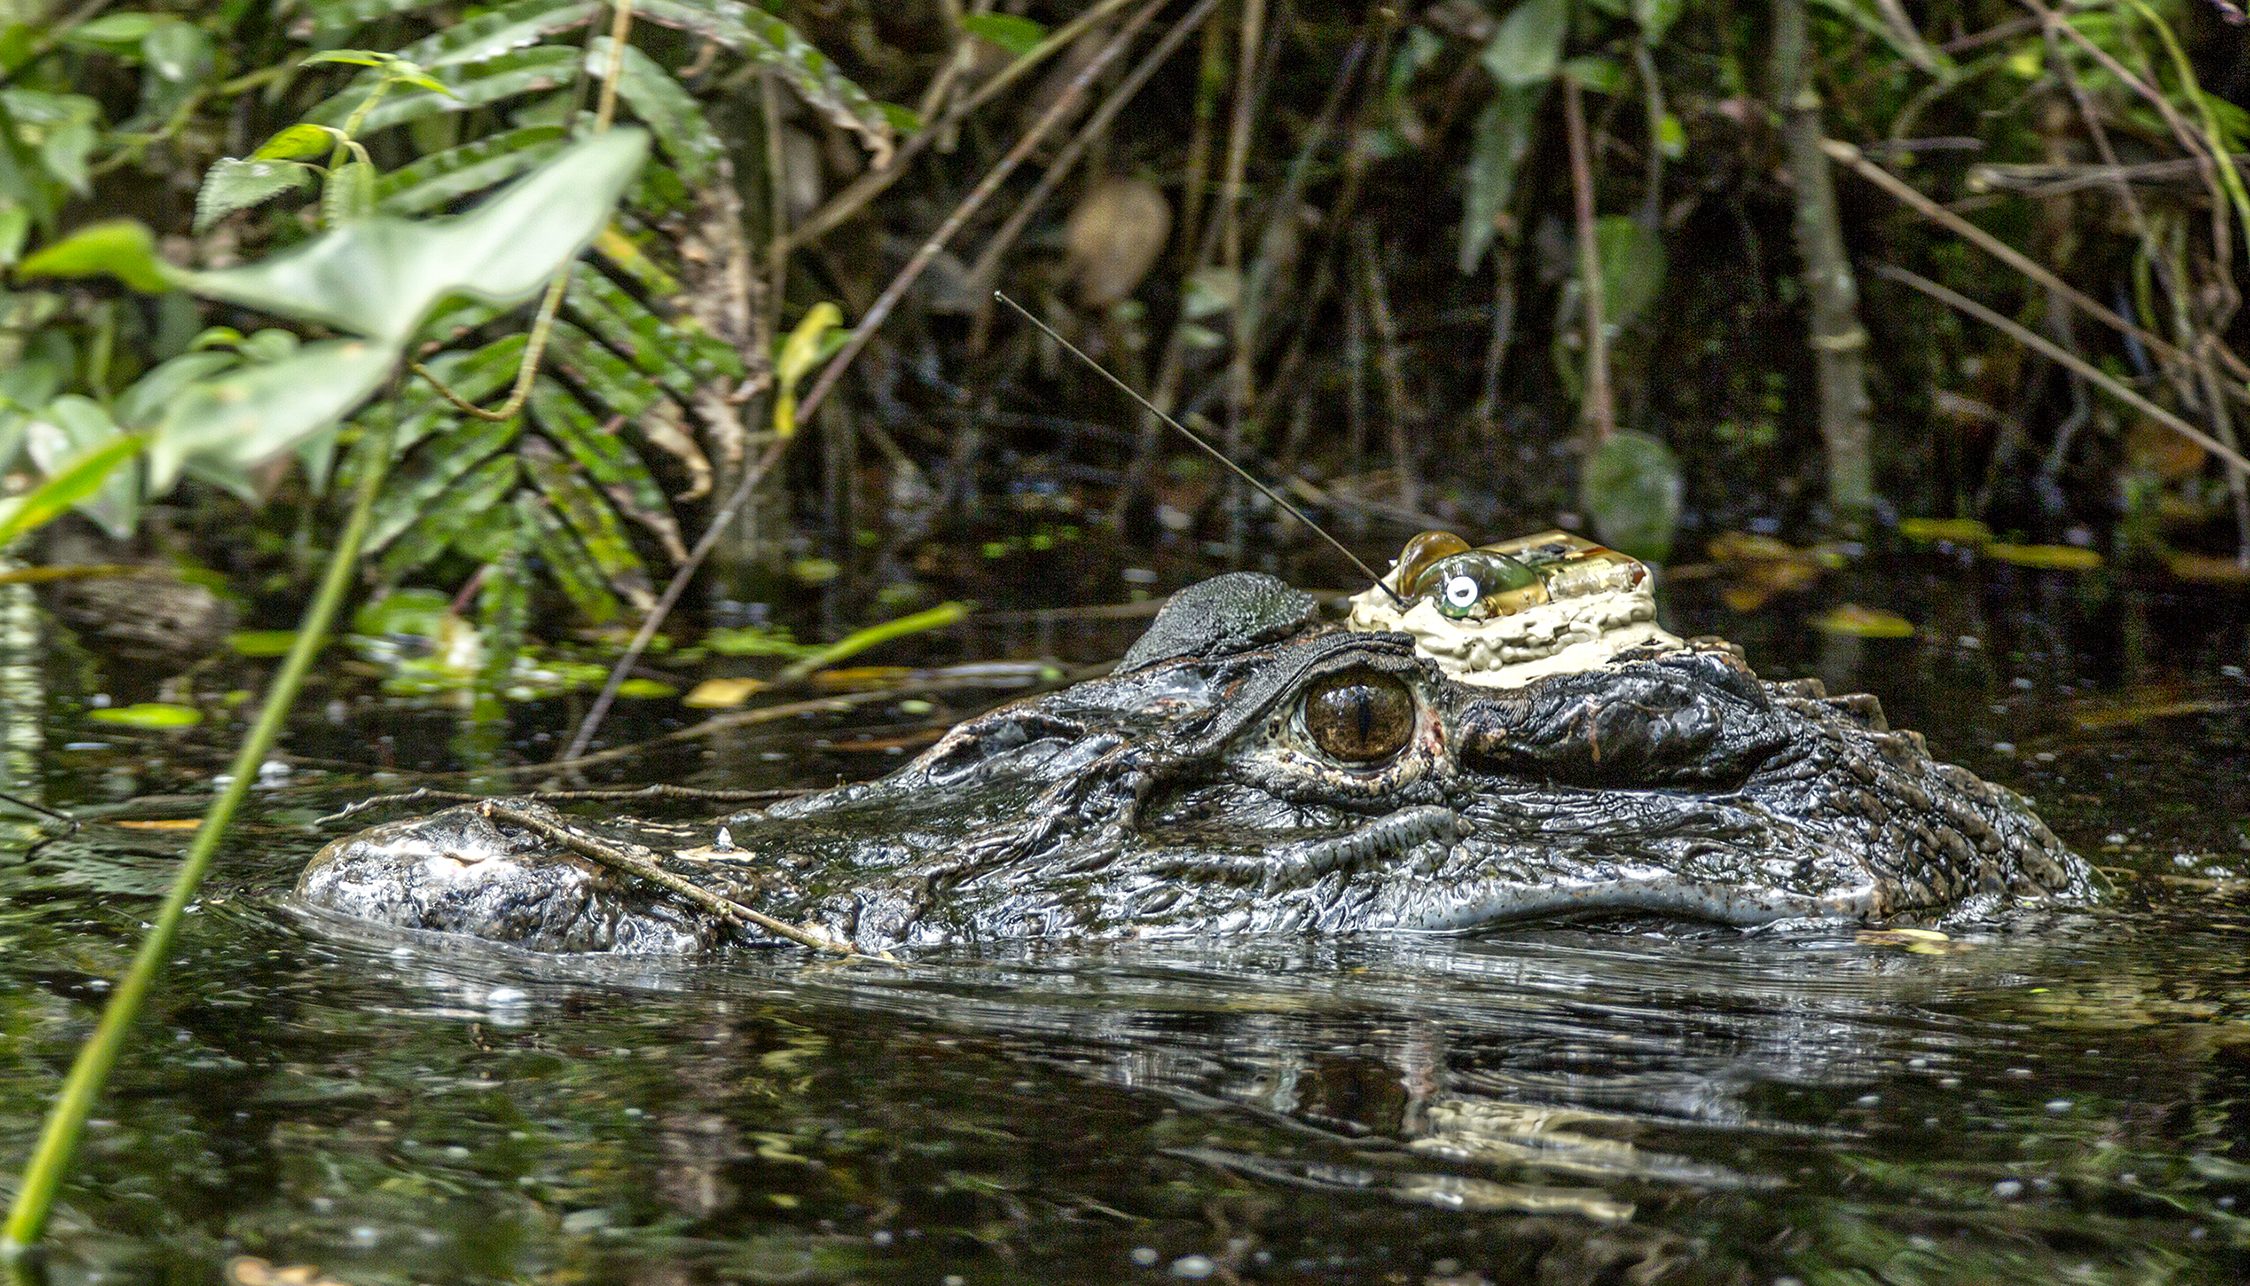 Male black caiman with an Argos satellite transmitter glued to its head (photo S Caut)